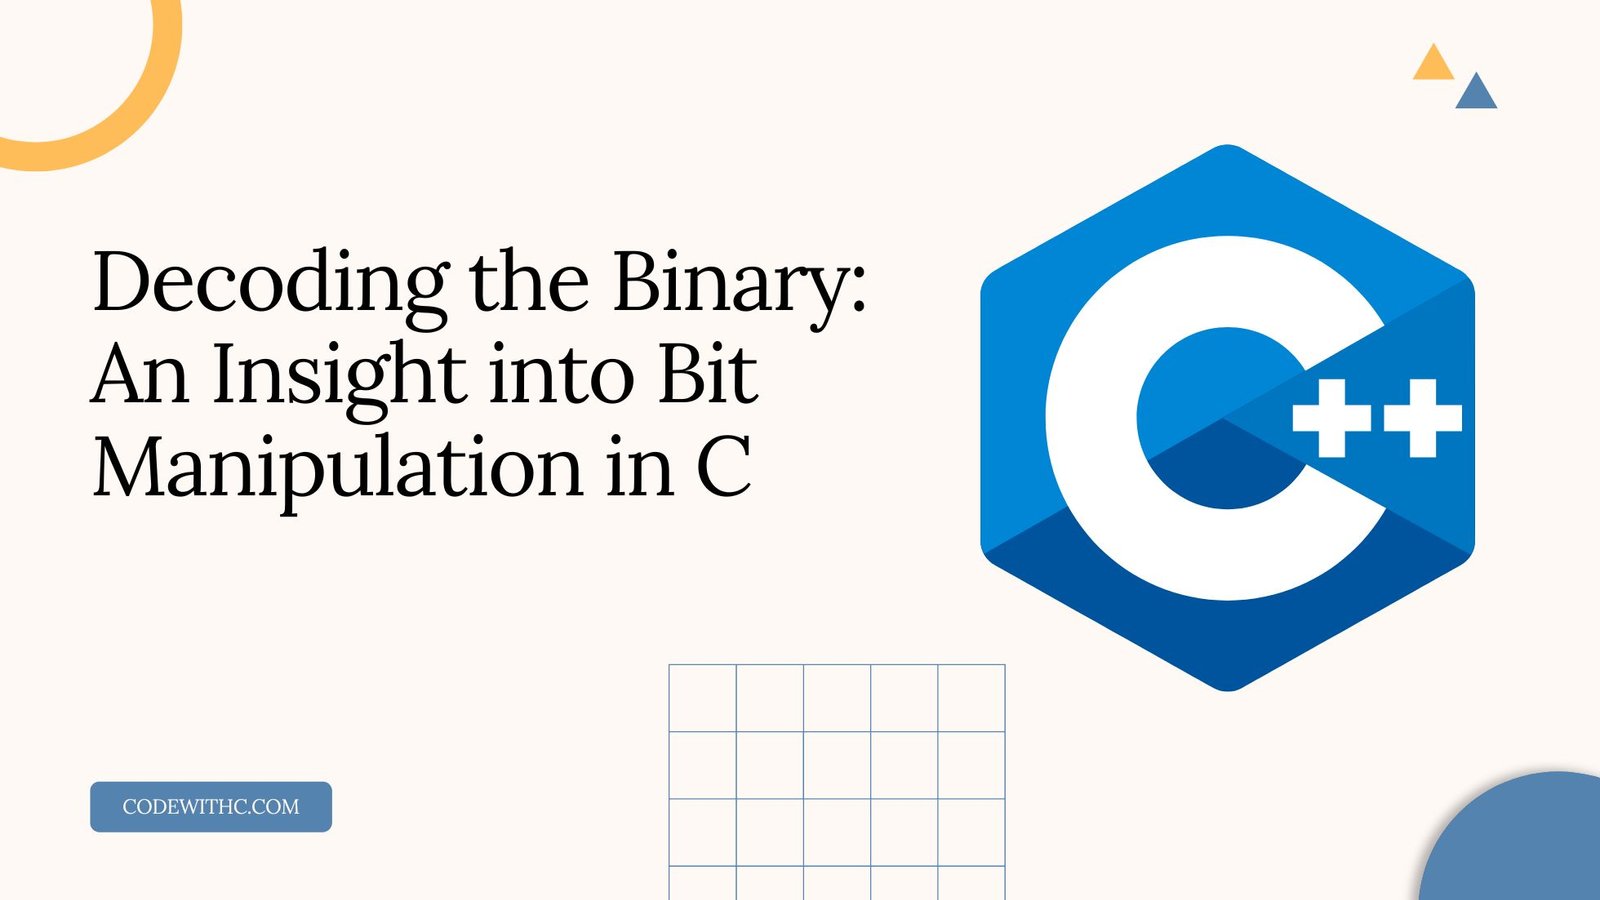 Decoding the Binary: An Insight into Bit Manipulation in C